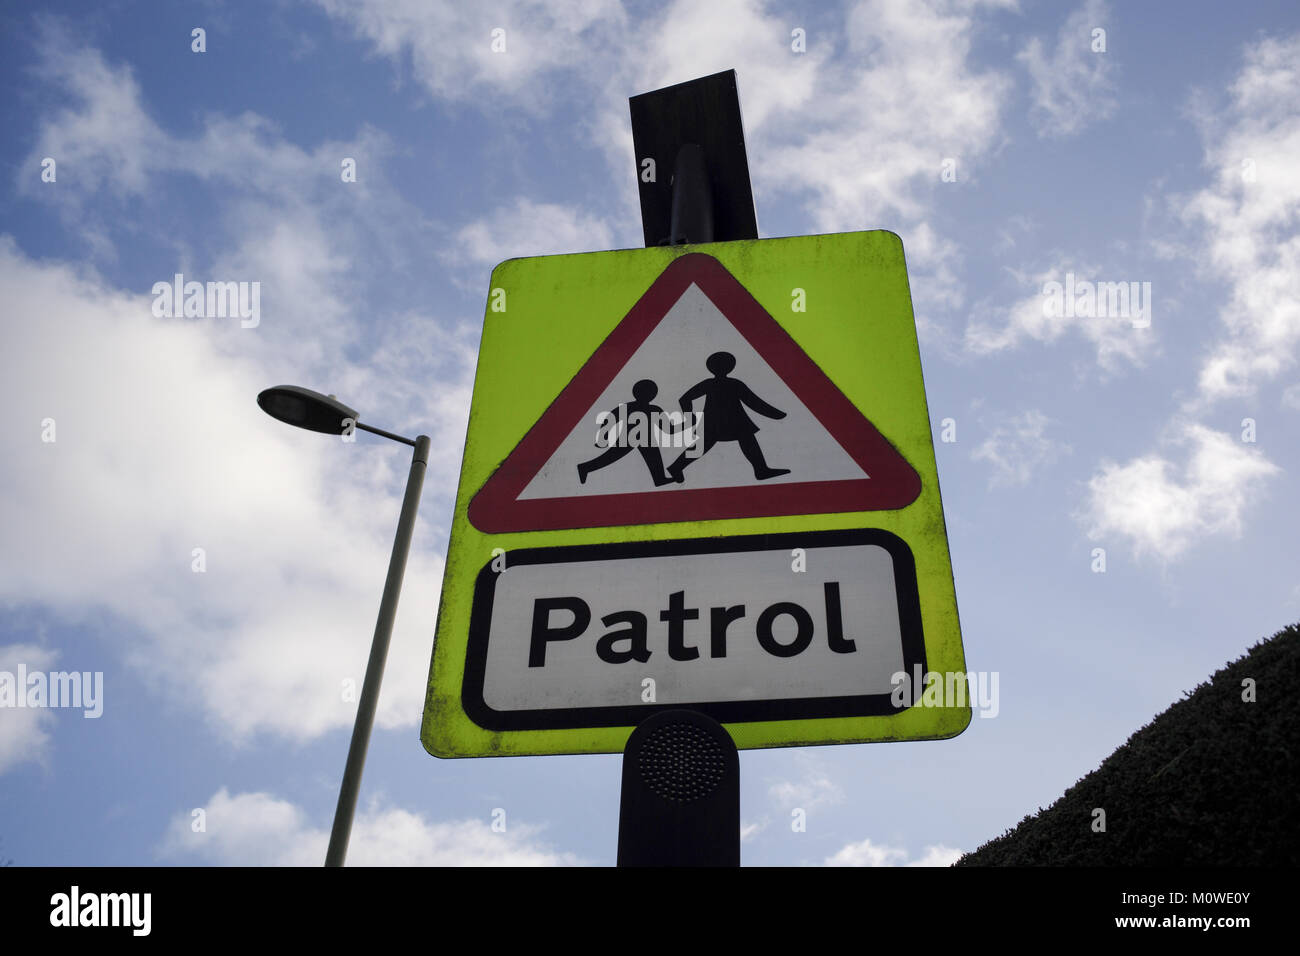 School crossing patrol sign in luminous green with a sky background viewed from below. Stock Photo